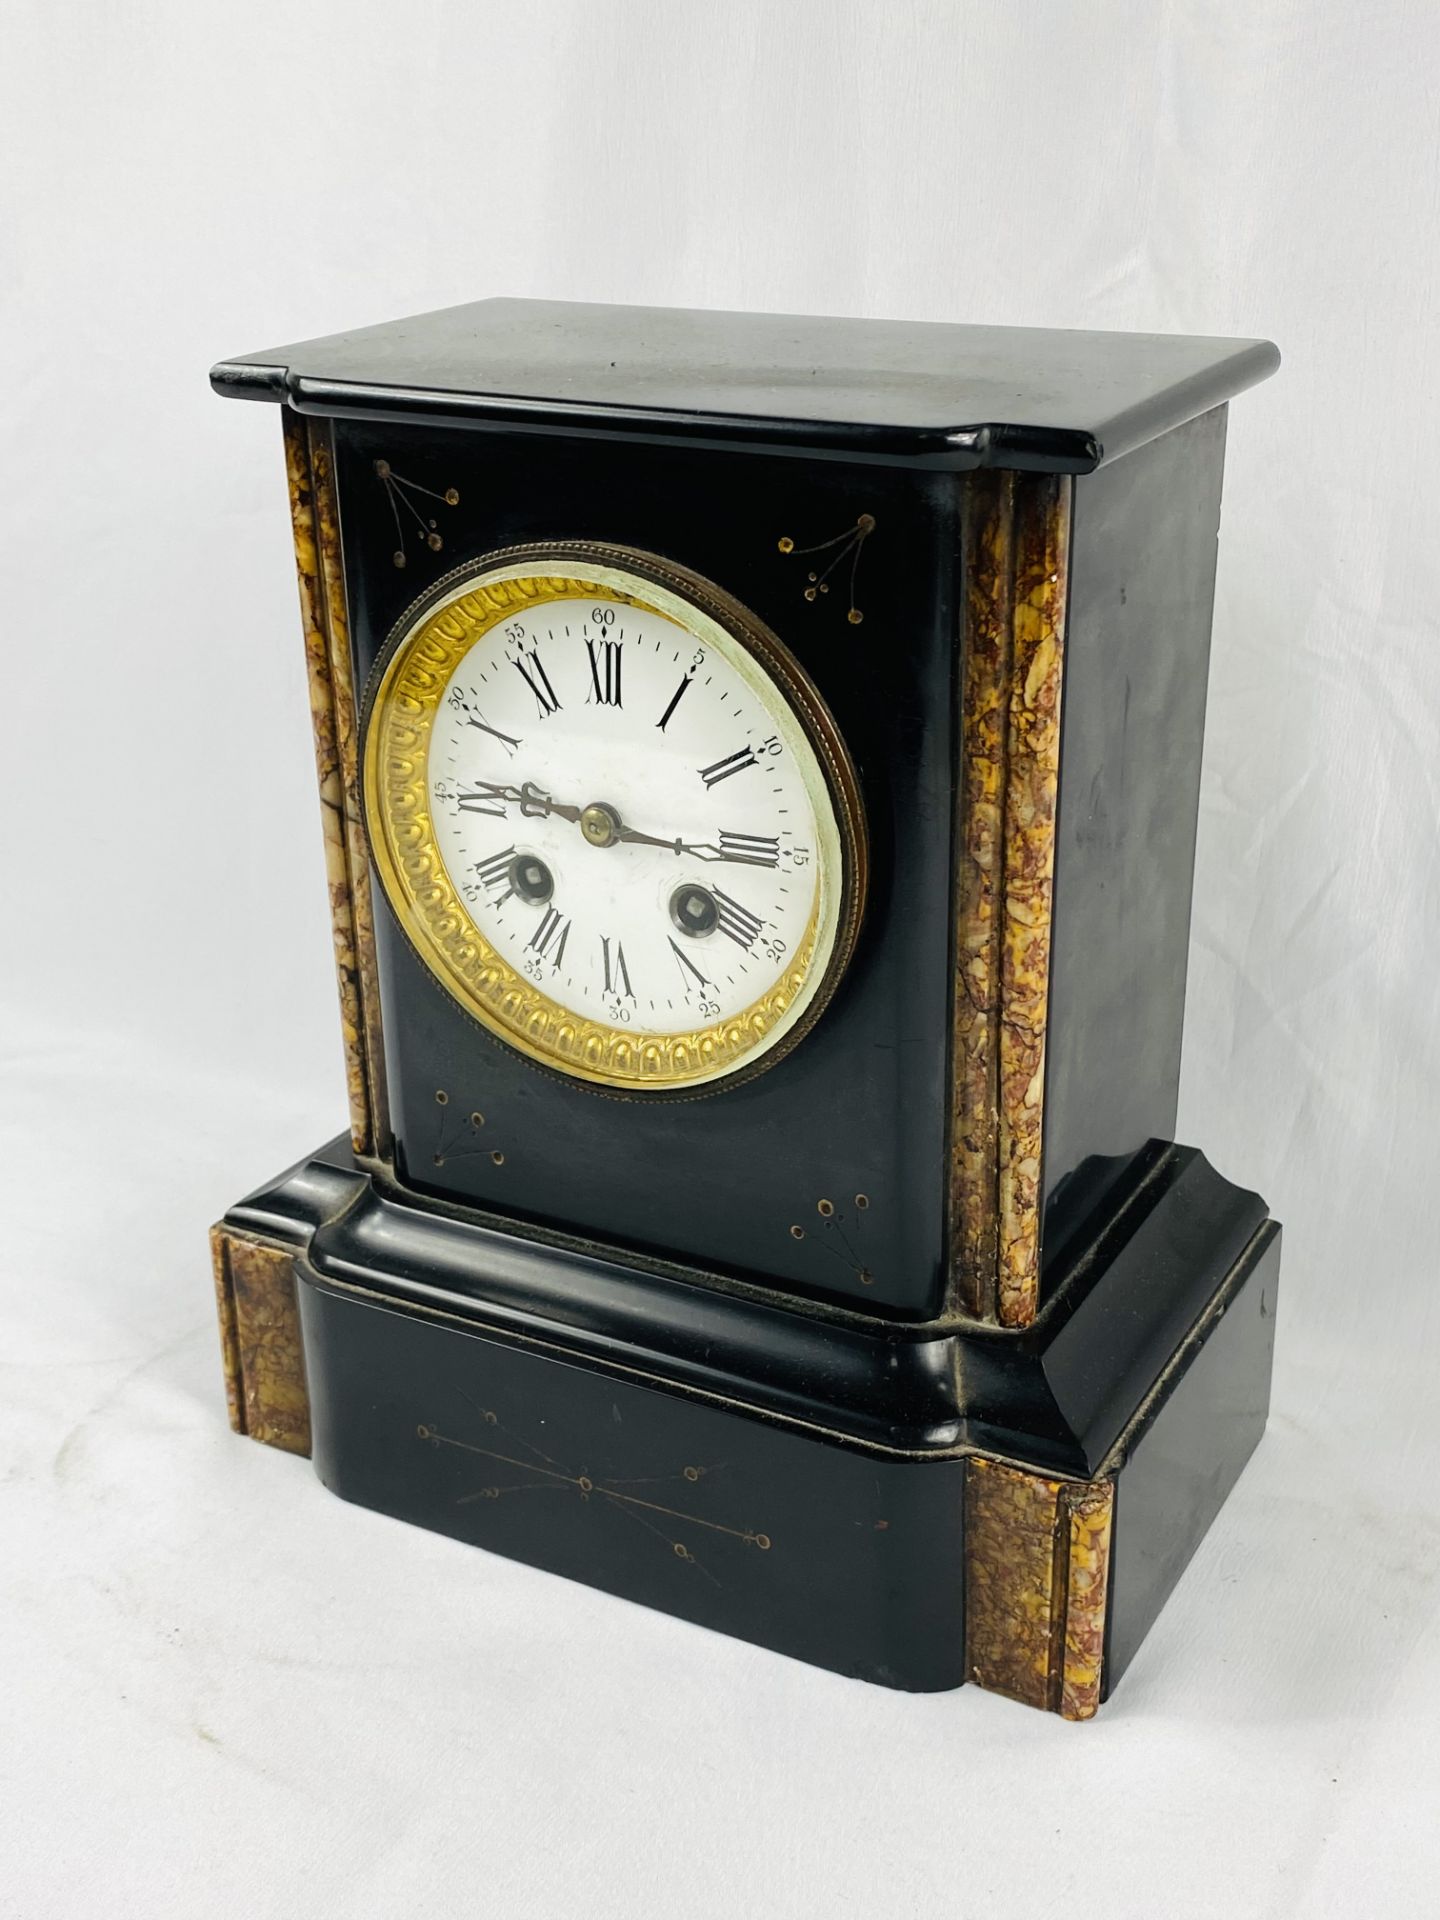 Slate and marble mantel clock - Image 2 of 4